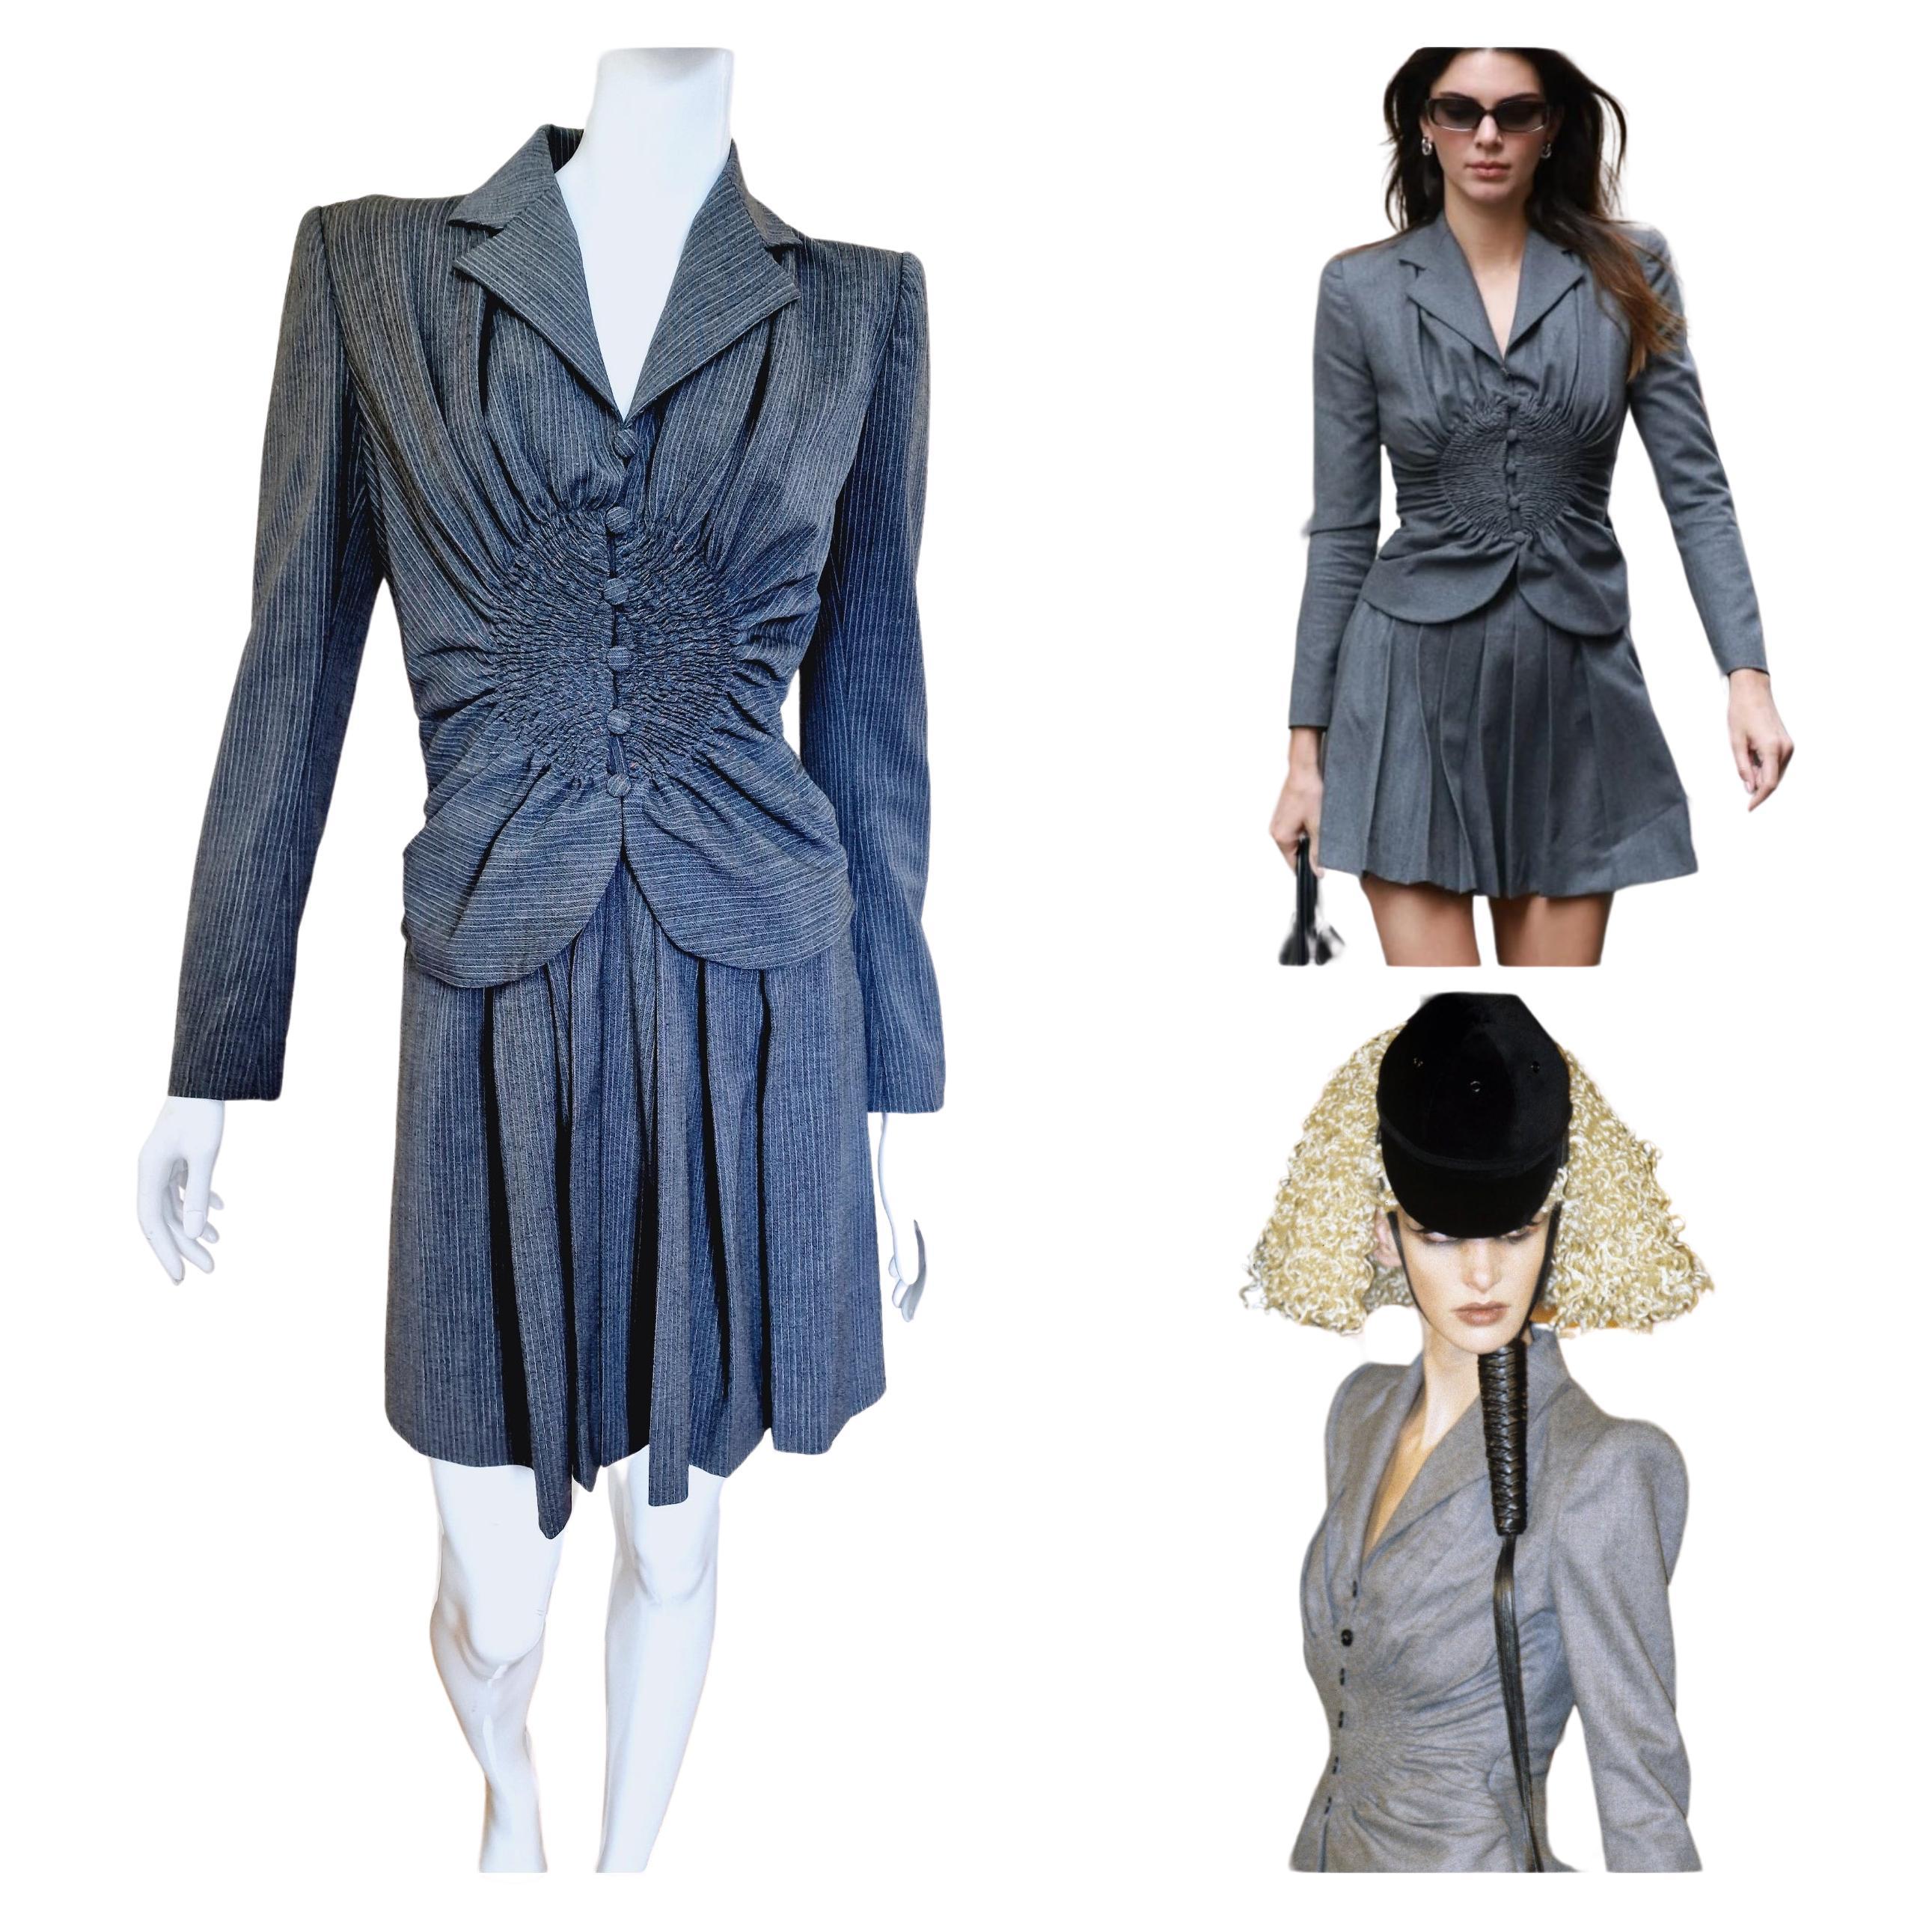 John Galliano Runway 1997 A/W Suzy Phinix Ruched Gray Kendall Jenner Suit Dress